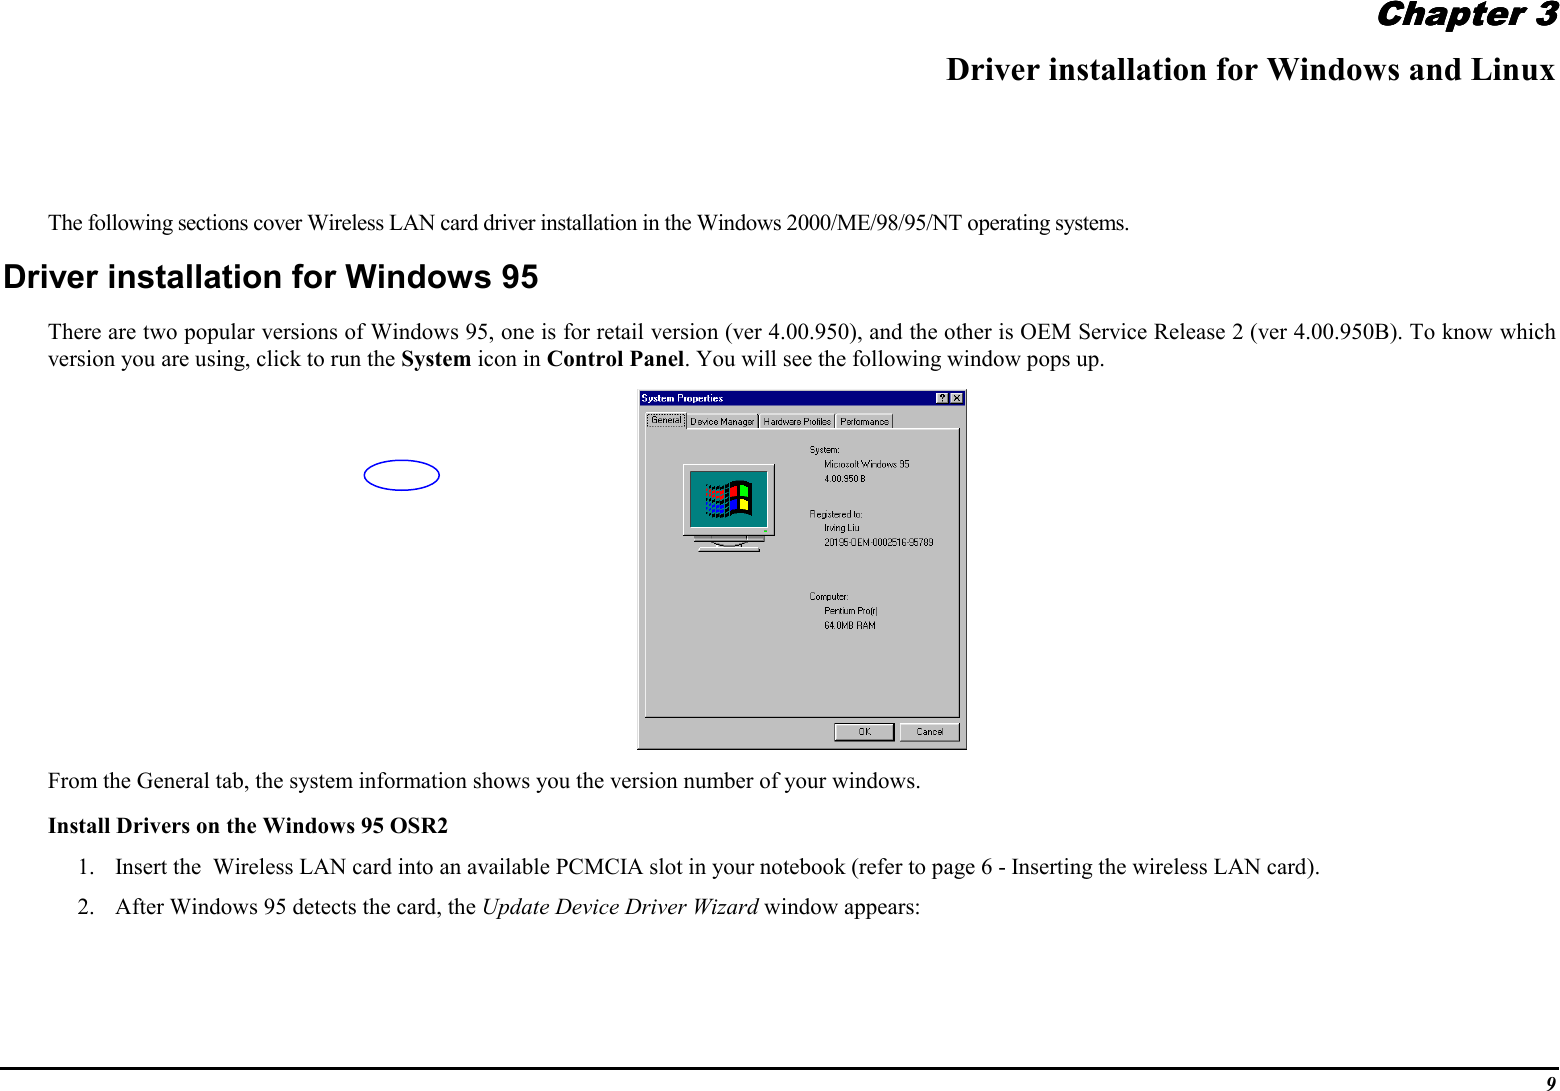 9Chapter 3Chapter 3Chapter 3Chapter 3Driver installation for Windows and LinuxThe following sections cover Wireless LAN card driver installation in the Windows 2000/ME/98/95/NT operating systems.Driver installation for Windows 95There are two popular versions of Windows 95, one is for retail version (ver 4.00.950), and the other is OEM Service Release 2 (ver 4.00.950B). To know whichversion you are using, click to run the System icon in Control Panel. You will see the following window pops up.From the General tab, the system information shows you the version number of your windows.Install Drivers on the Windows 95 OSR21. Insert the  Wireless LAN card into an available PCMCIA slot in your notebook (refer to page 6 - Inserting the wireless LAN card).2. After Windows 95 detects the card, the Update Device Driver Wizard window appears: